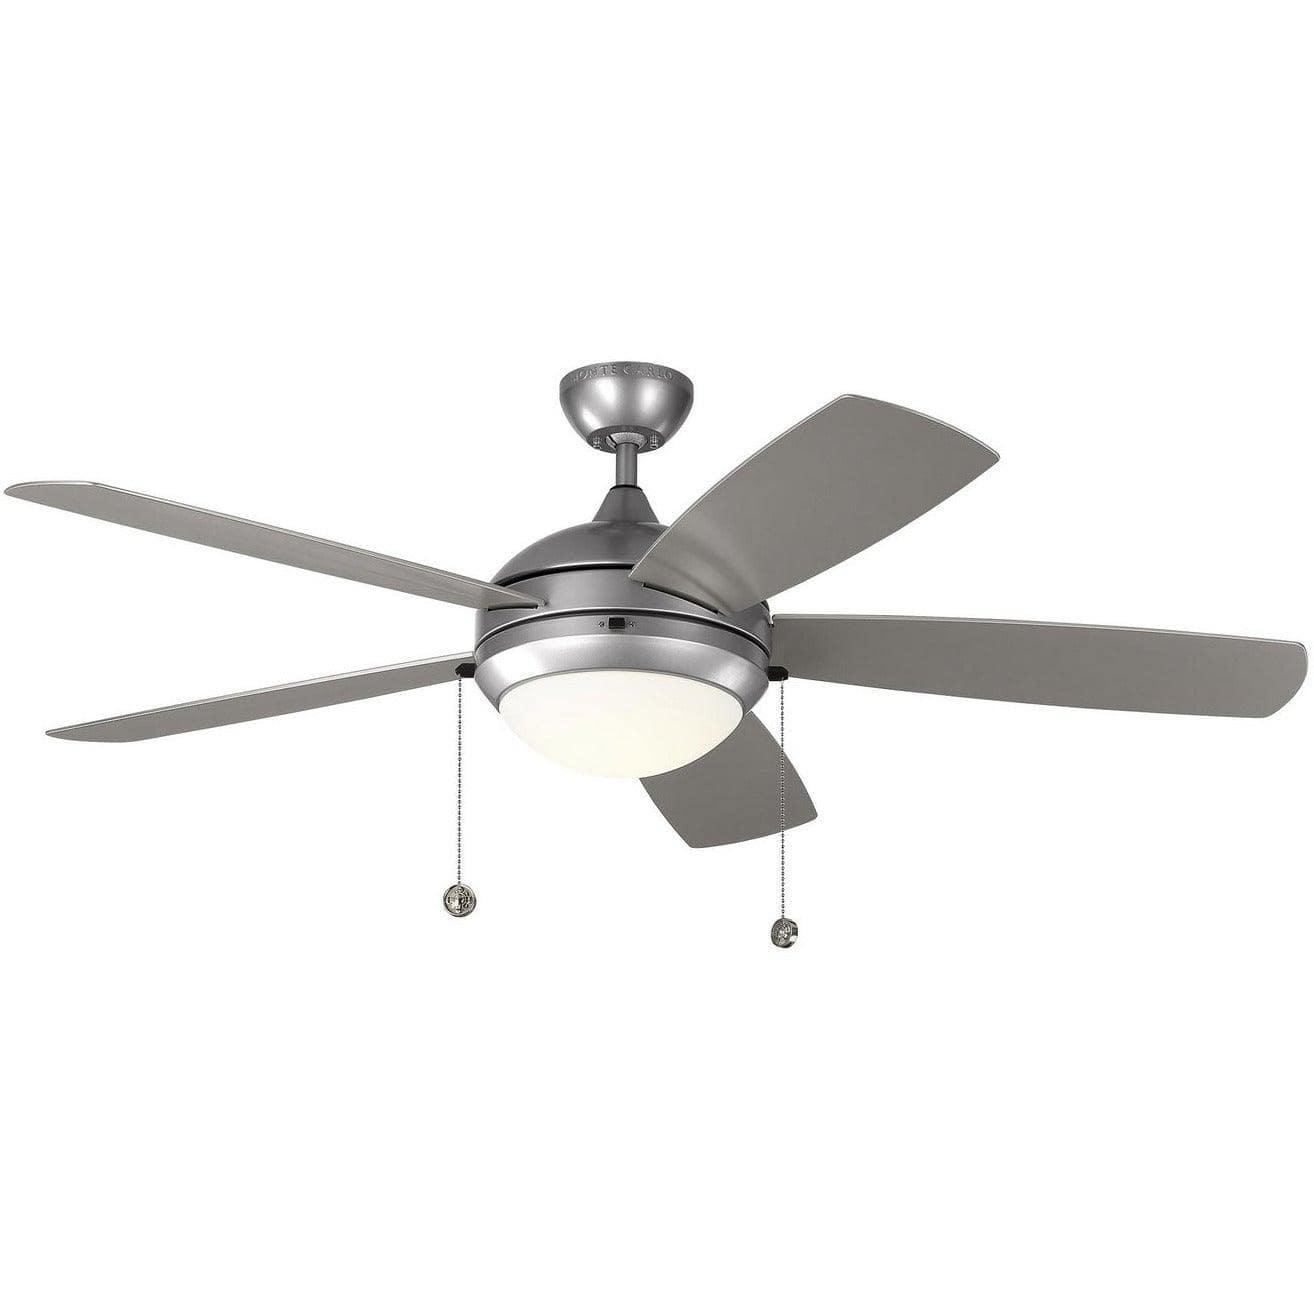 Visual Comfort Fan Collection - Discus Outdoor 52" Ceiling Fan - 5DIW52PBSD | Montreal Lighting & Hardware